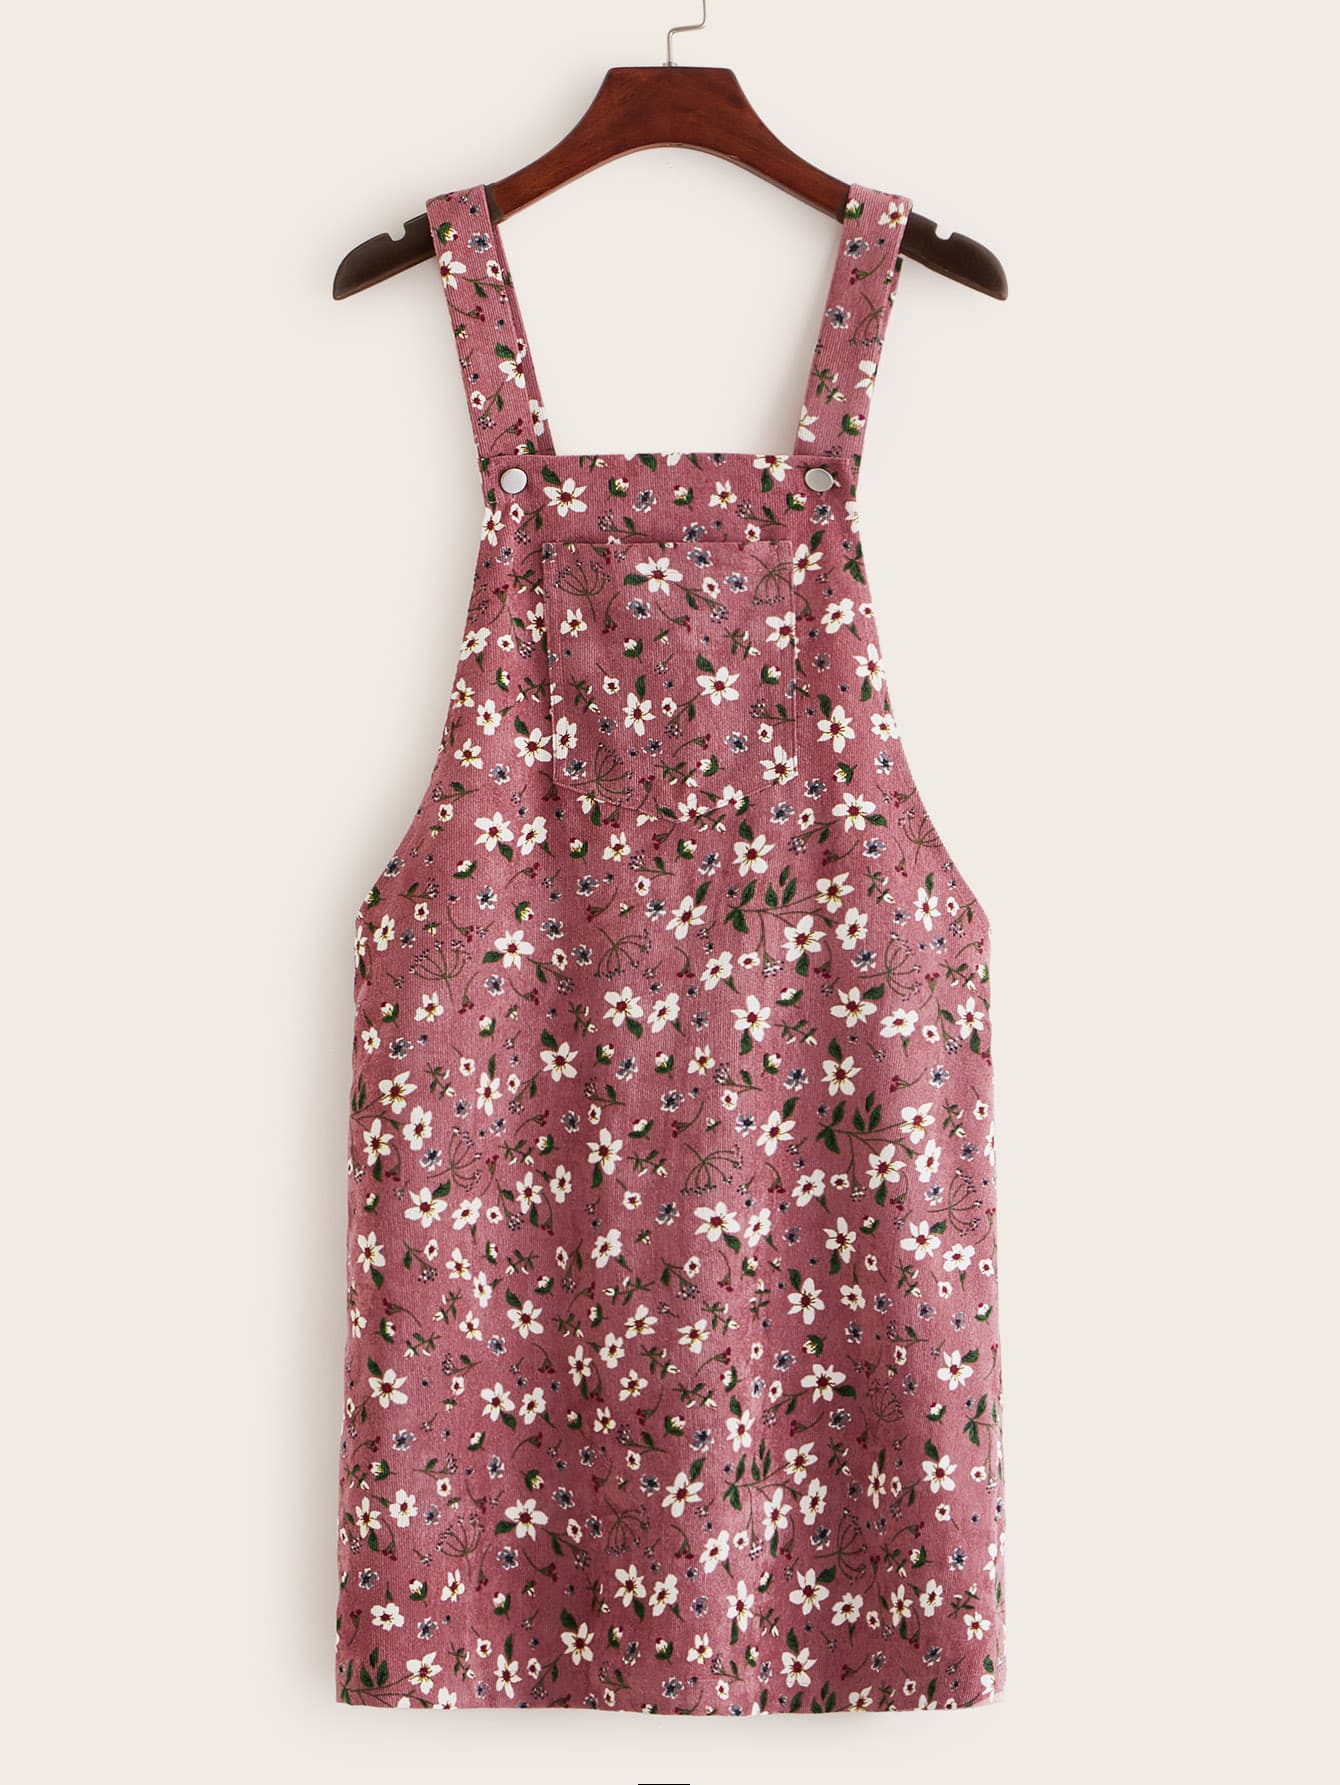 Pocket Patched Ditsy Floral Corduroy Dress